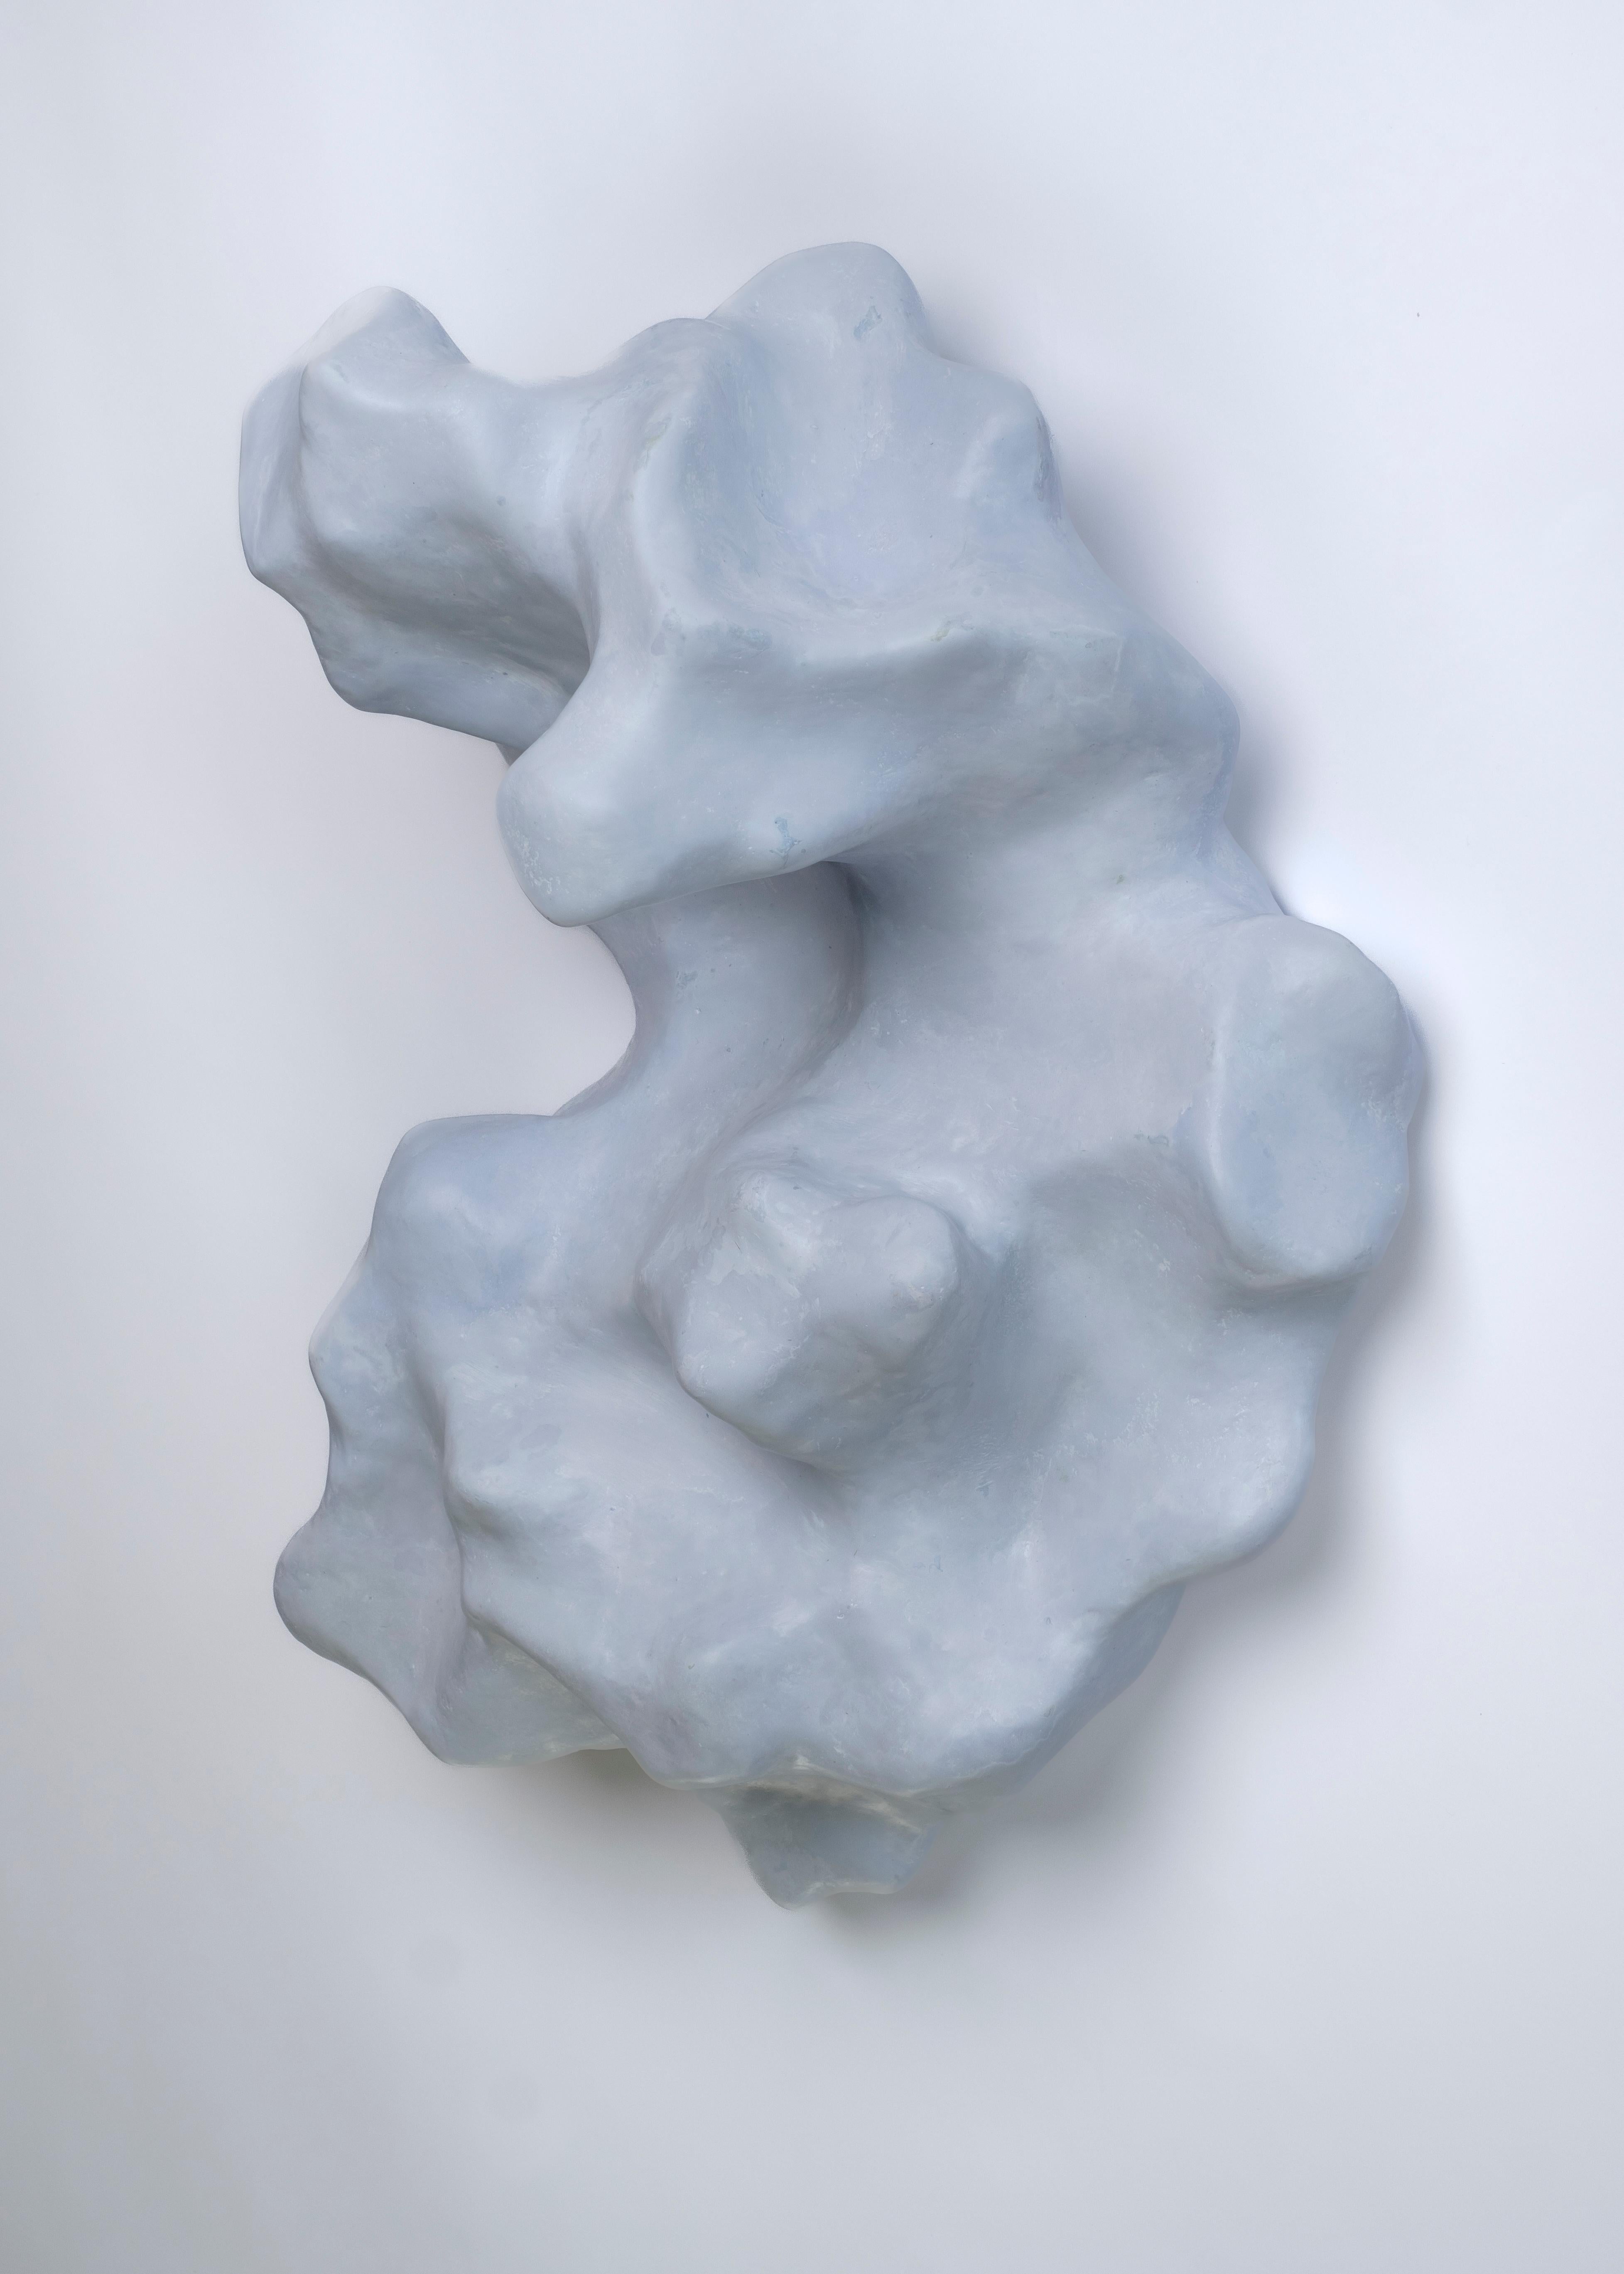 Other Wall-Mounted Sculpture in Lilac by Gert Wessels